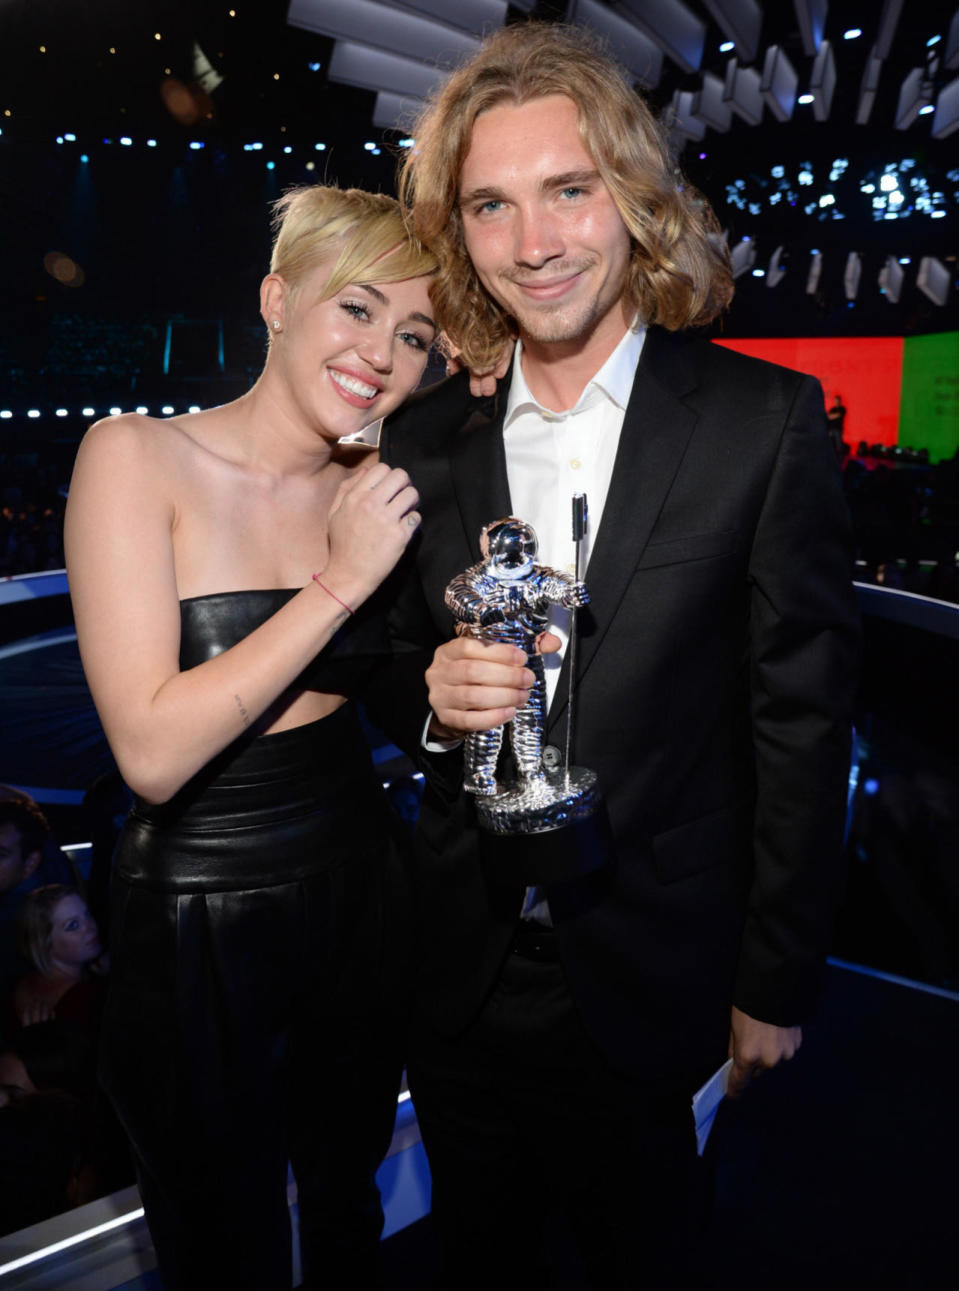 Miley Cyrus Is Speechless (2014) - A year after Twerkgate, Miley returned to the VMAs to accept a Video of the Year Moonman for “Wrecking Ball” and tried to class things up, using her time in the spotlight to draw awareness to an important issue: teen homelessness. Miley didn’t even give a speech, instead sitting on the edge of the stage in tears (real tears, not “Wrecking Ball”-video tears) while her date, a young homeless man named Jesse Helt, accepted the award on her behalf. Unfortunately, Miley was still unable to entirely avoid controversy, when it was revealed that Helt had a criminal past; his TV appearance prompted police to send out a warrant for his arrest for probation violation, and he was later sentenced to six months in jail. (Source: Getty Images)